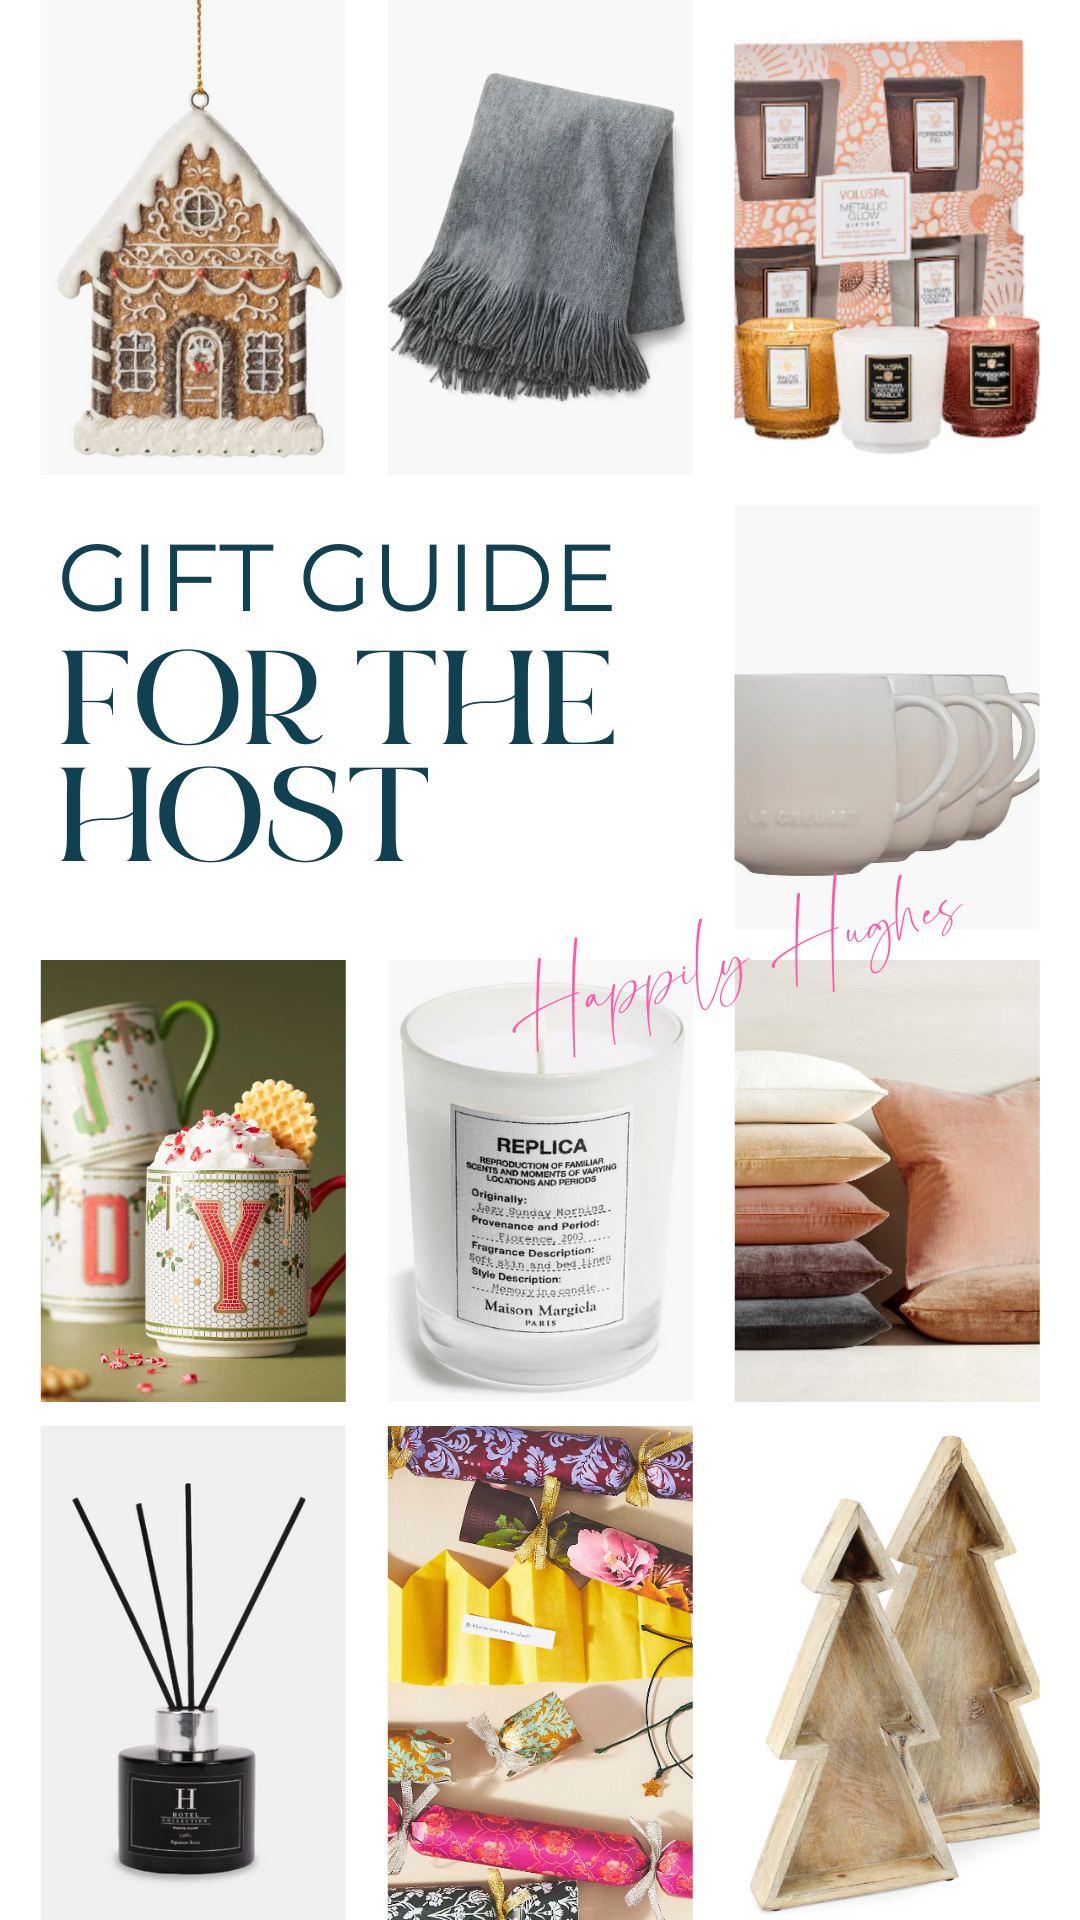 Gift Guide Ideas for the Host this Holiday season